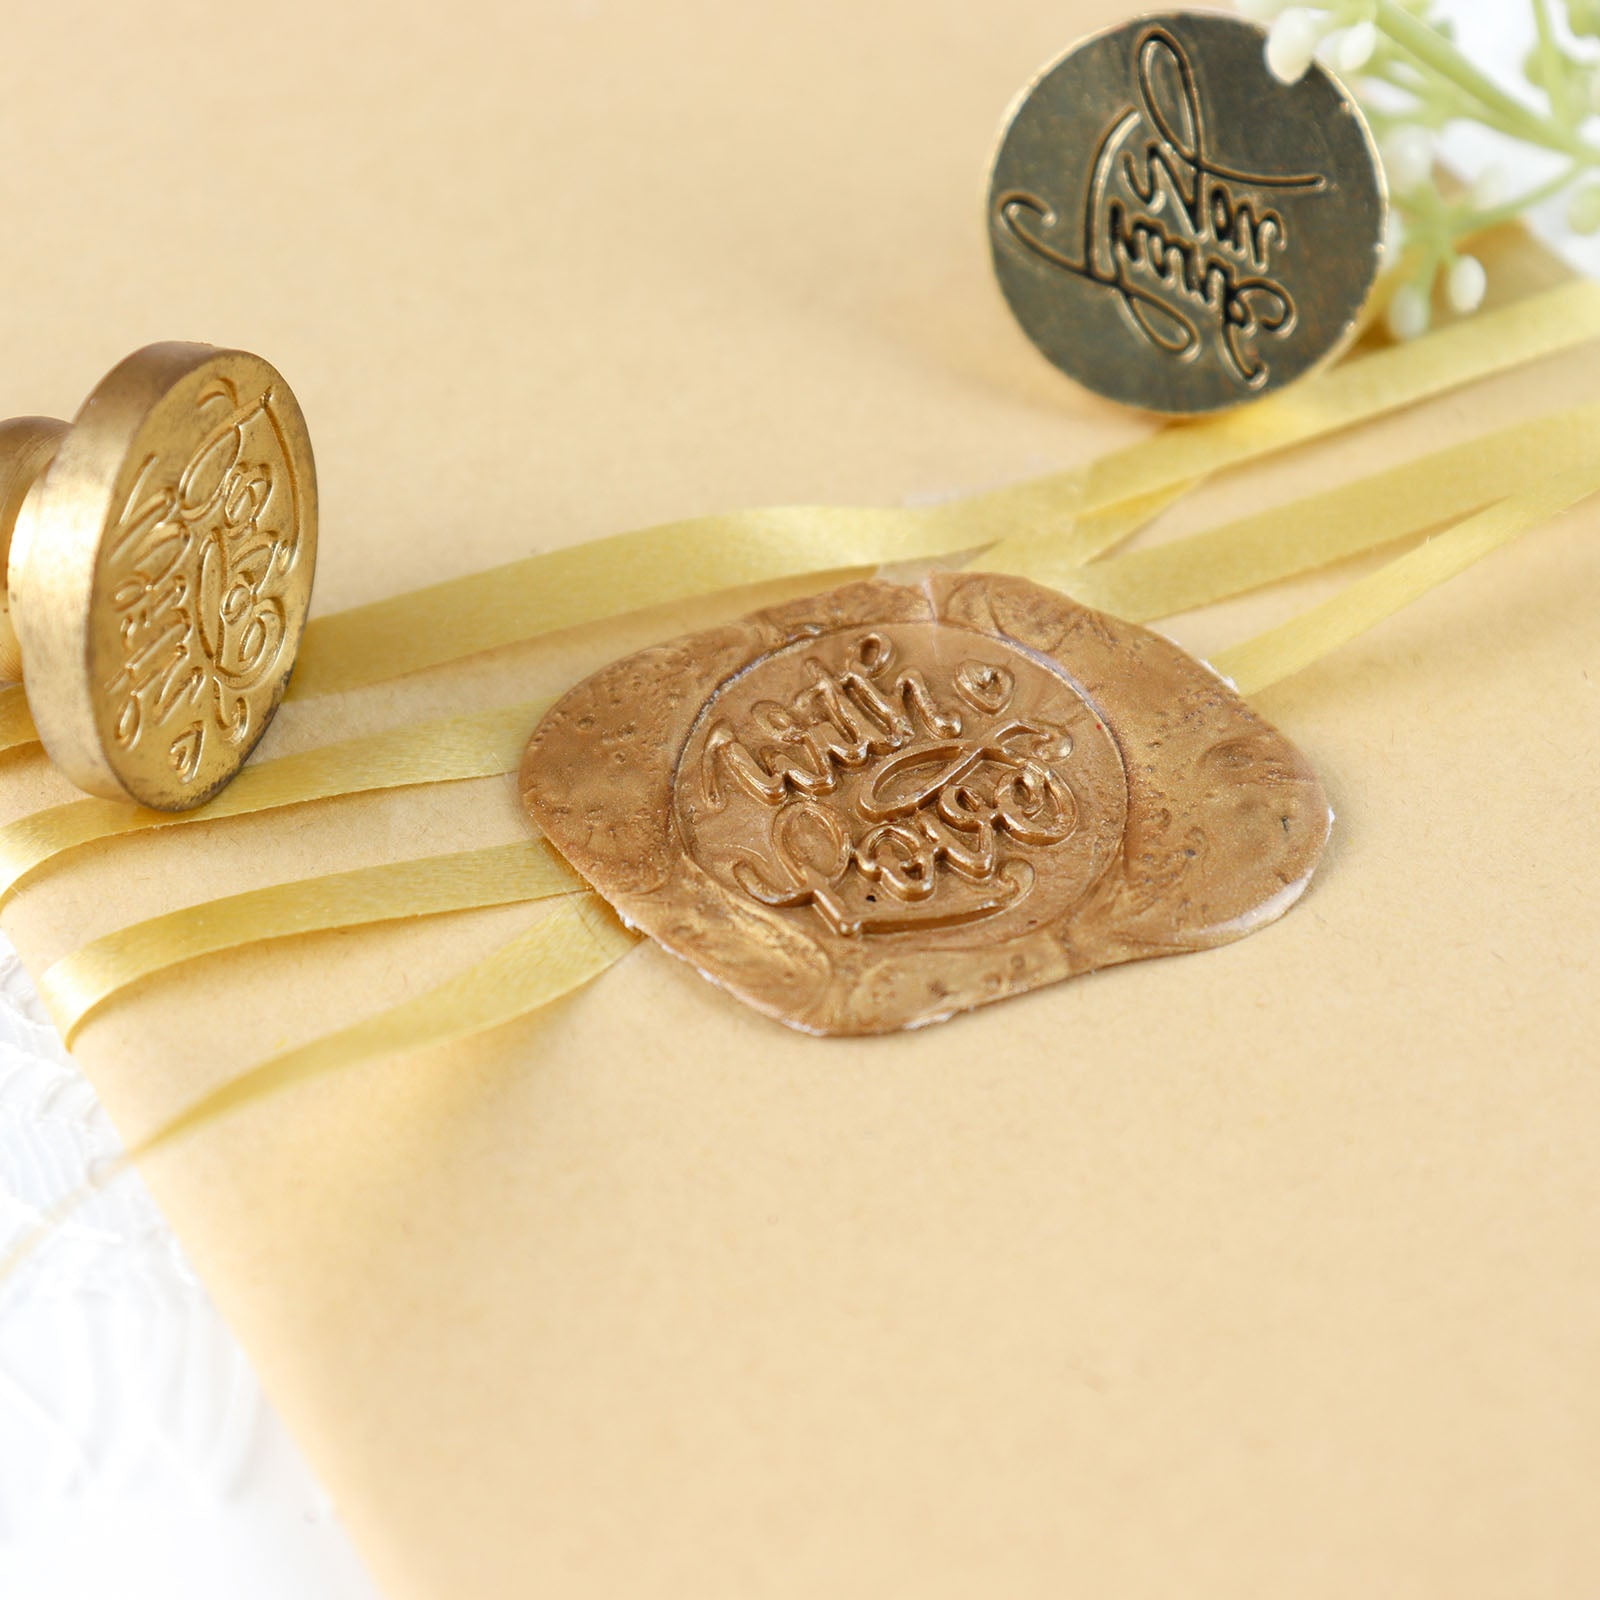 3D Retro Theme Wax Letter Seal Kit, Unicorn Boat Packaging Wax Stamp,  Invitation Seal, Wedding Gift Idea,letter Seal 